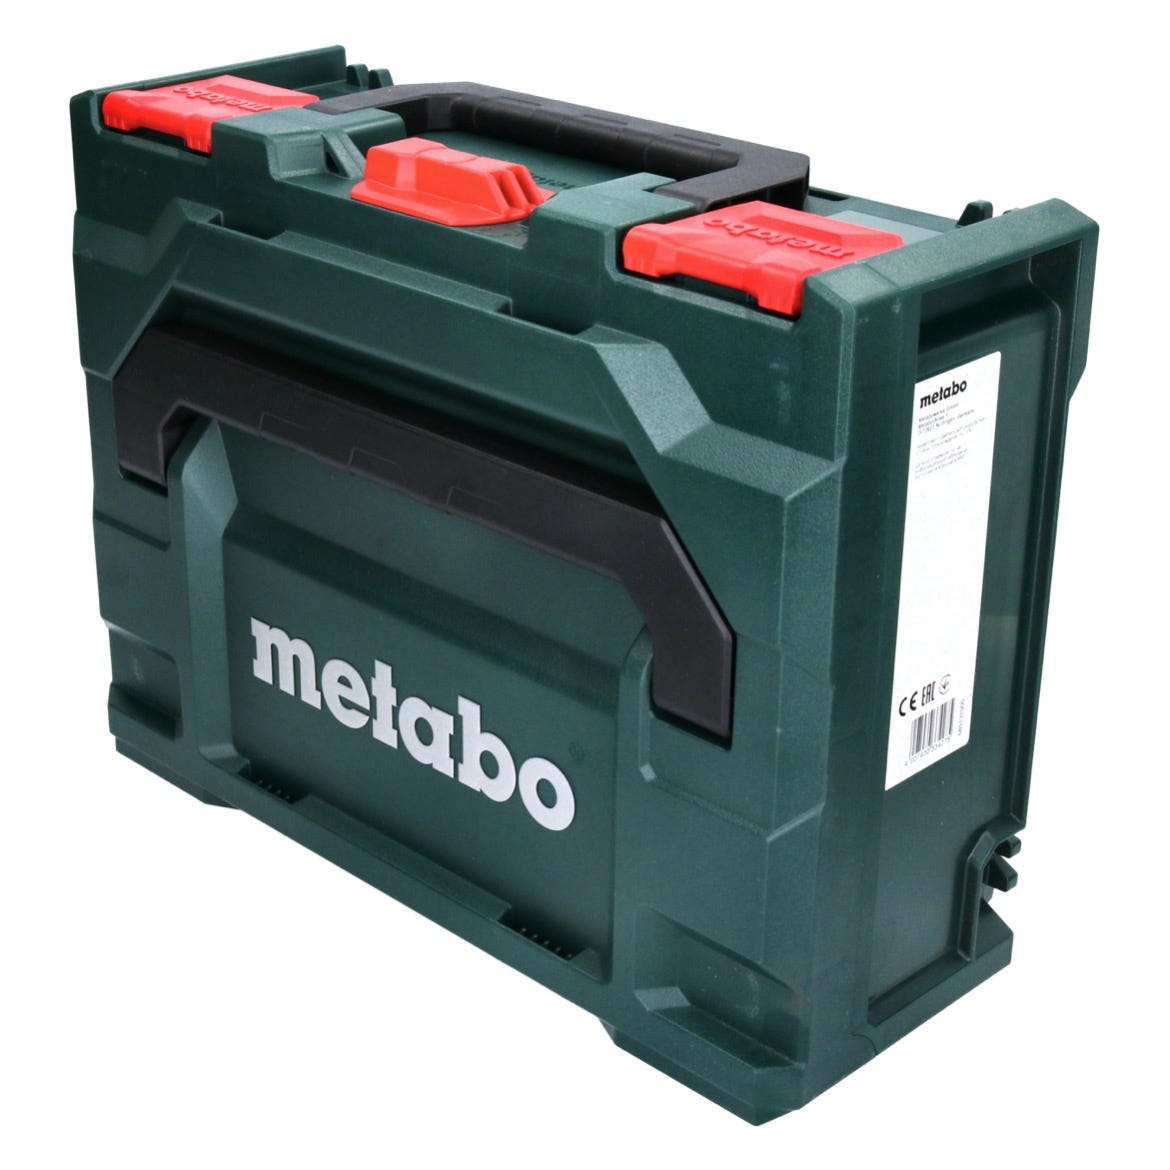 Metabo metaBOX 145 Set: 4x Coffrets 396x296x145mm, système empilable + 4x Inserts universels 1